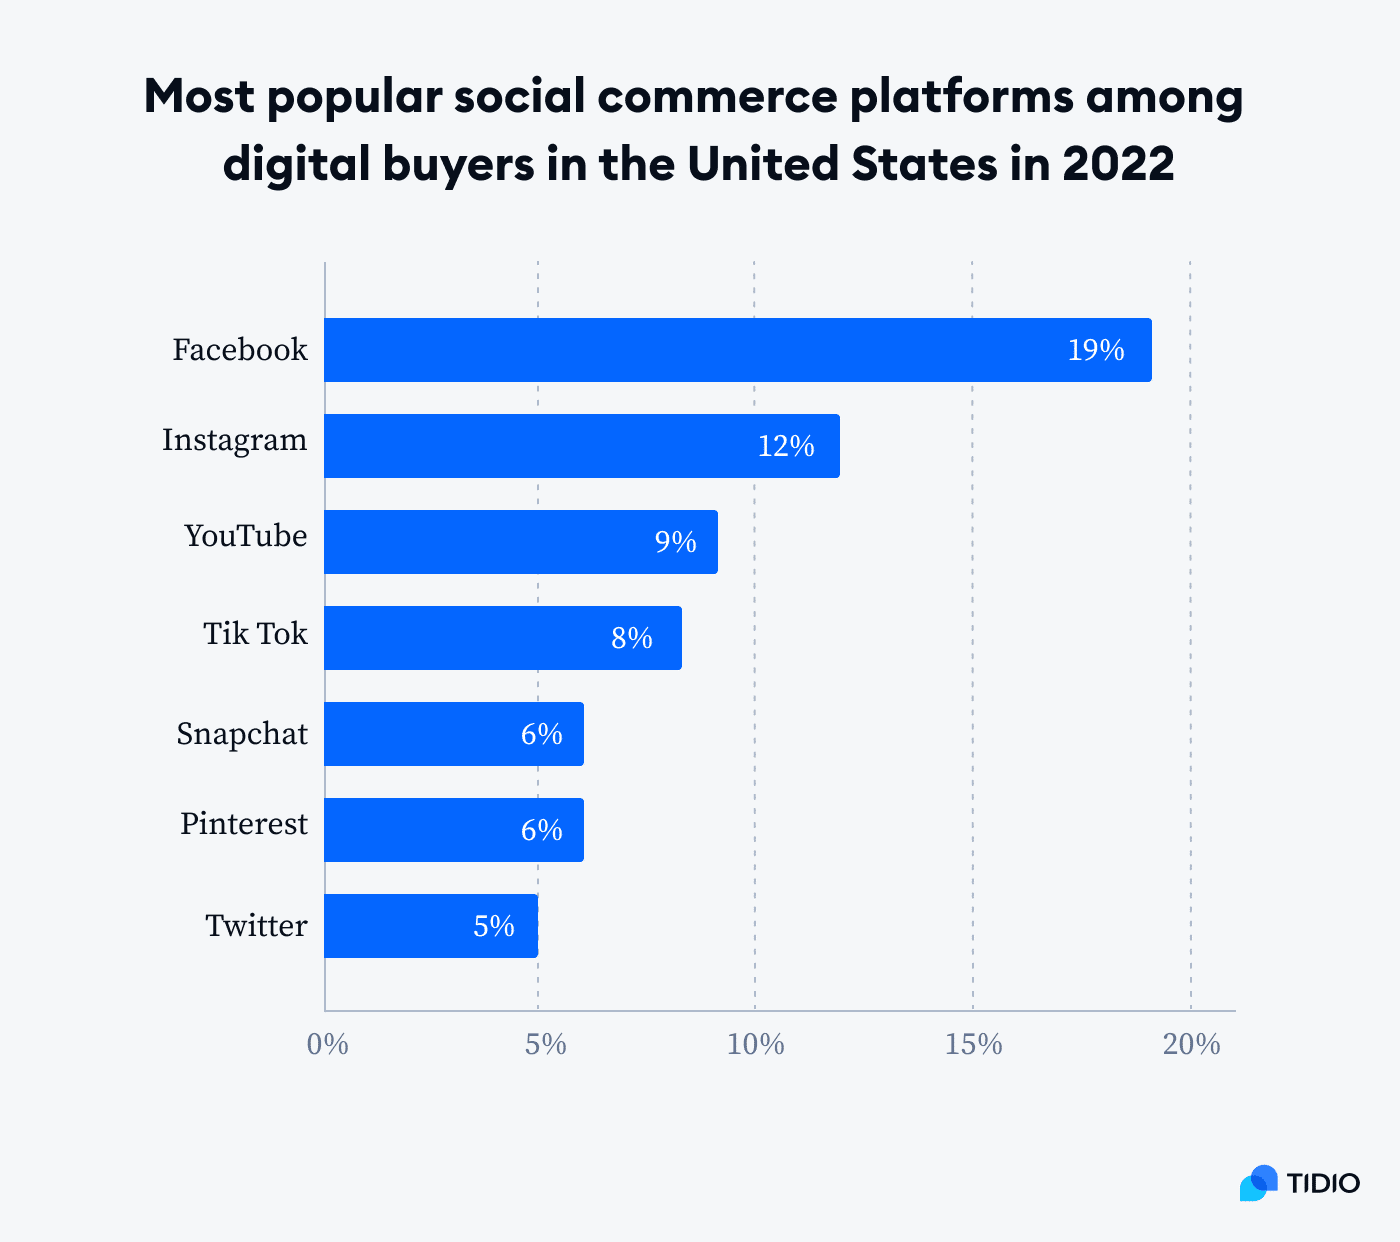 most popular social commerce platforms among digital buyers in the US in 2022